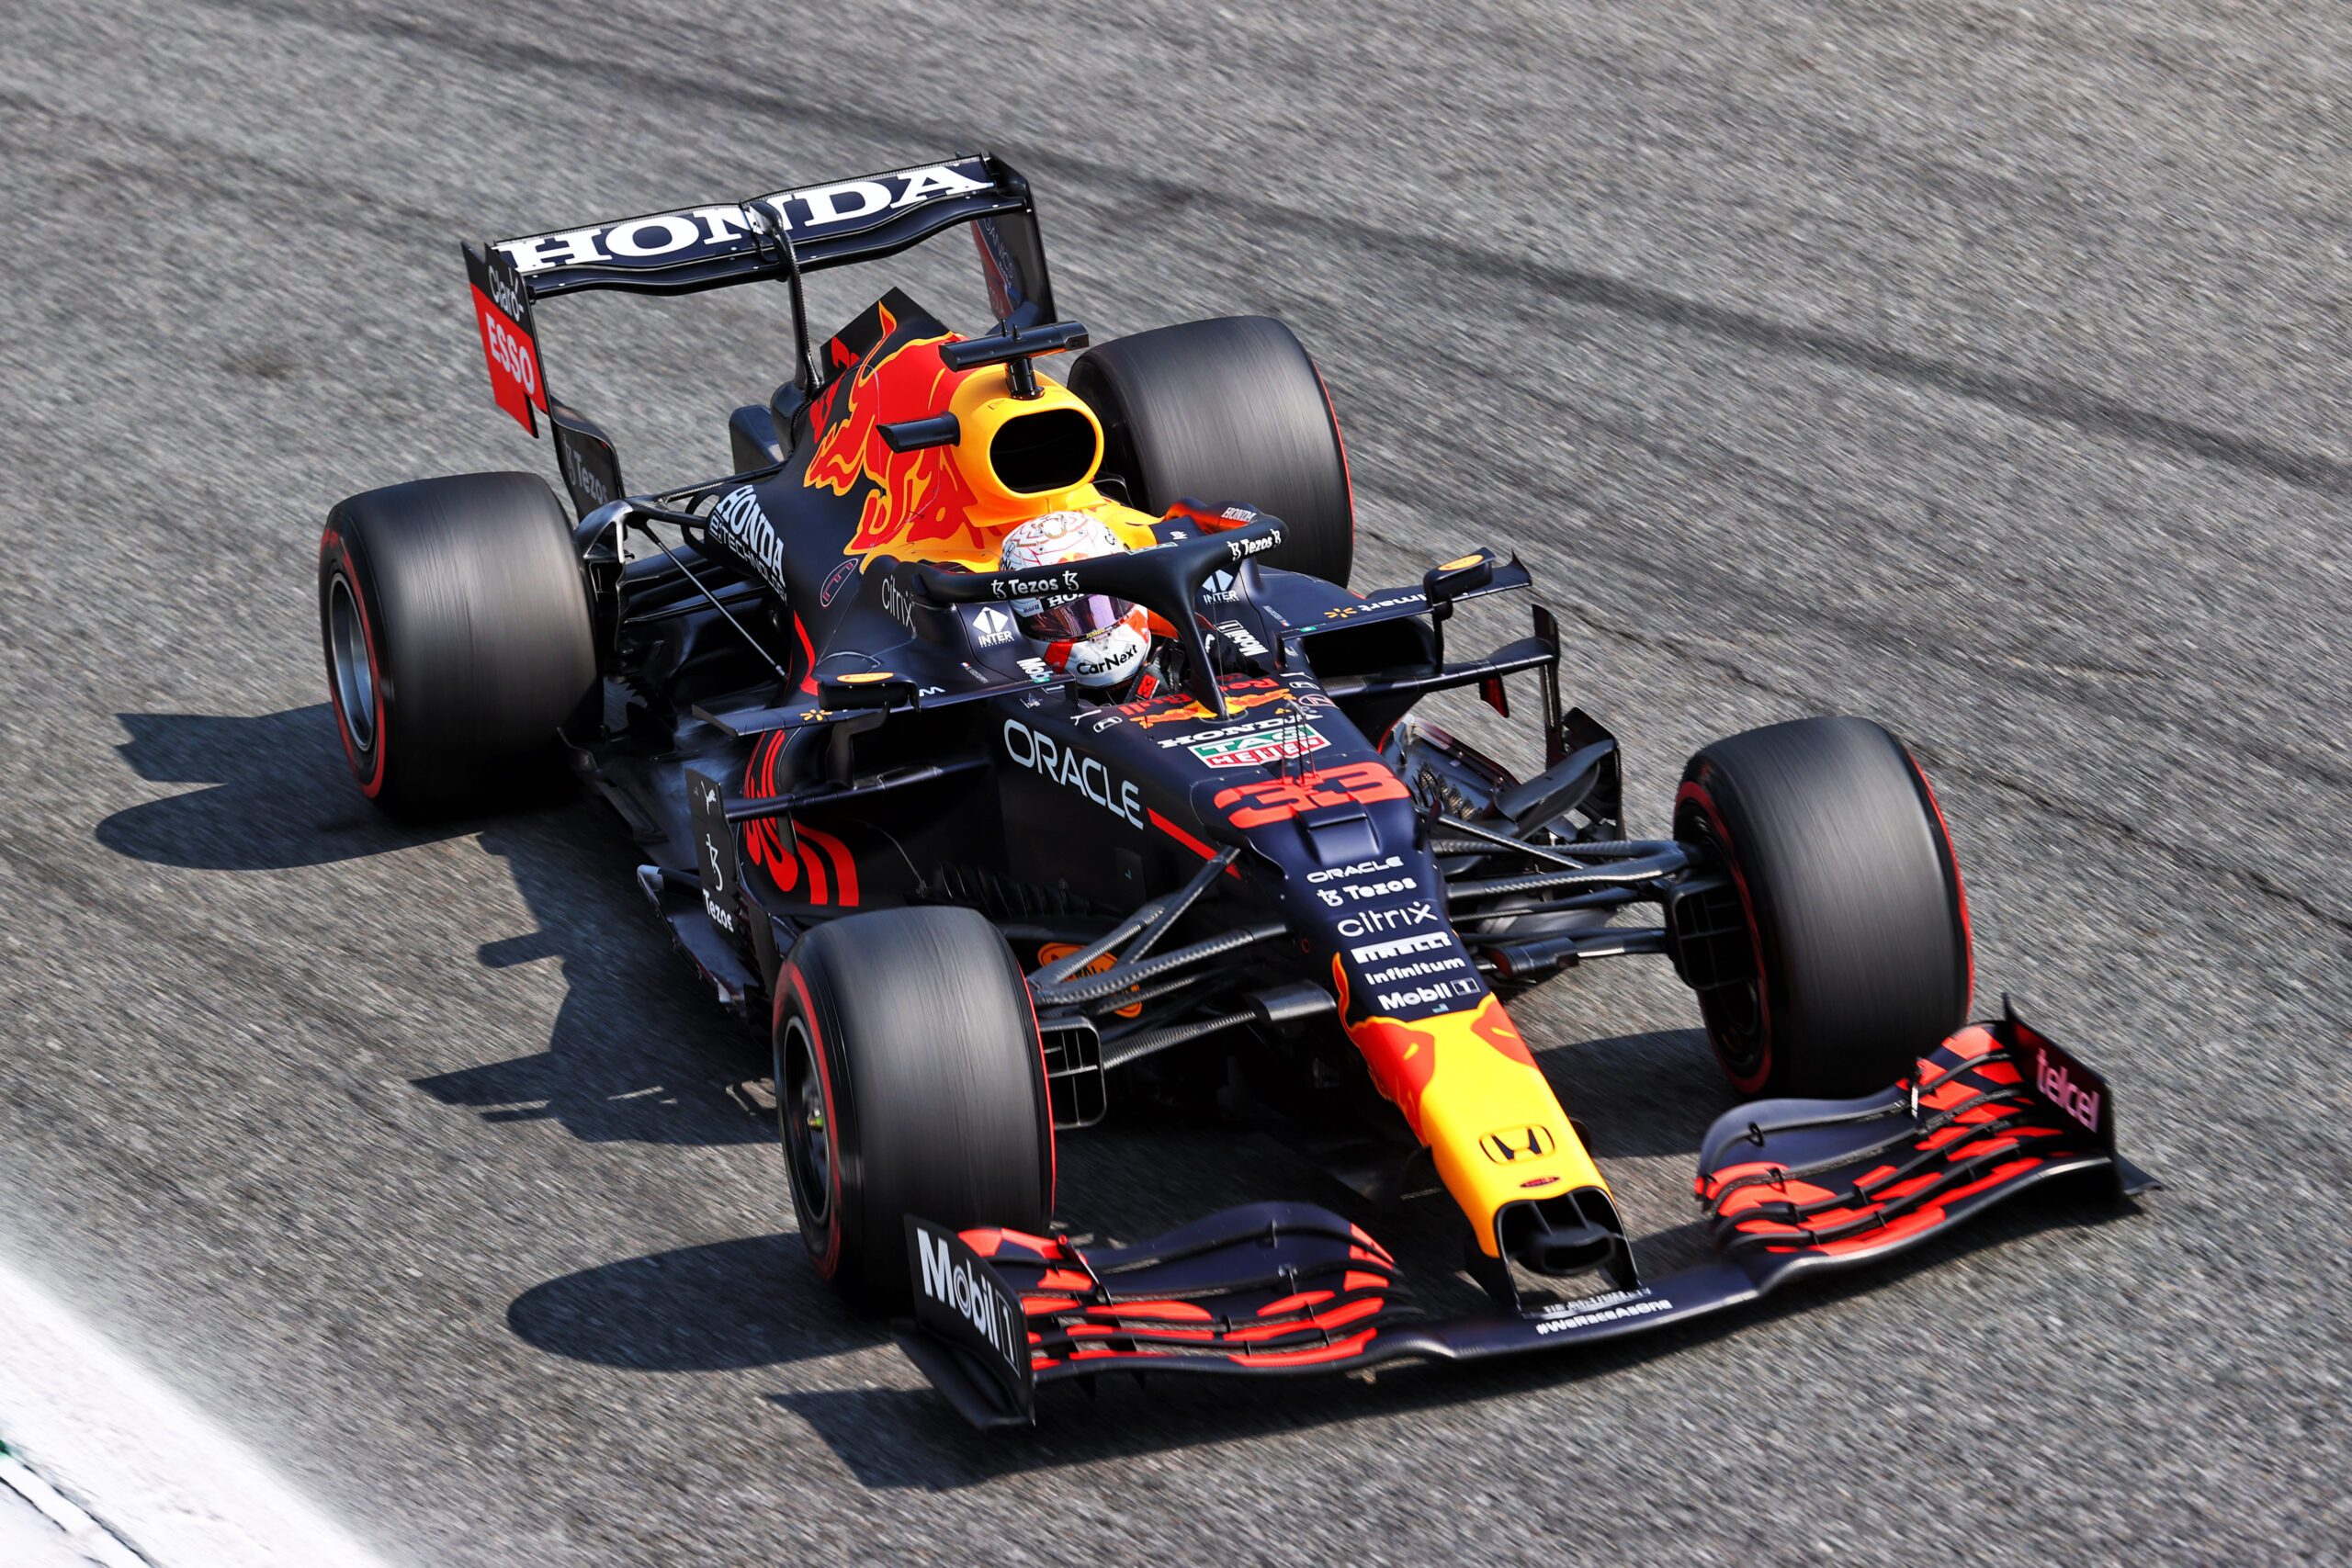 MONZA,ITALY,11.SEP.21 - MOTORSPORTS, FORMULA 1 - Grand Prix of Italy, Autodromo Nazionale, practice and sprint qualifying. Image shows Max Verstappen (NED/ Red Bull Racing).